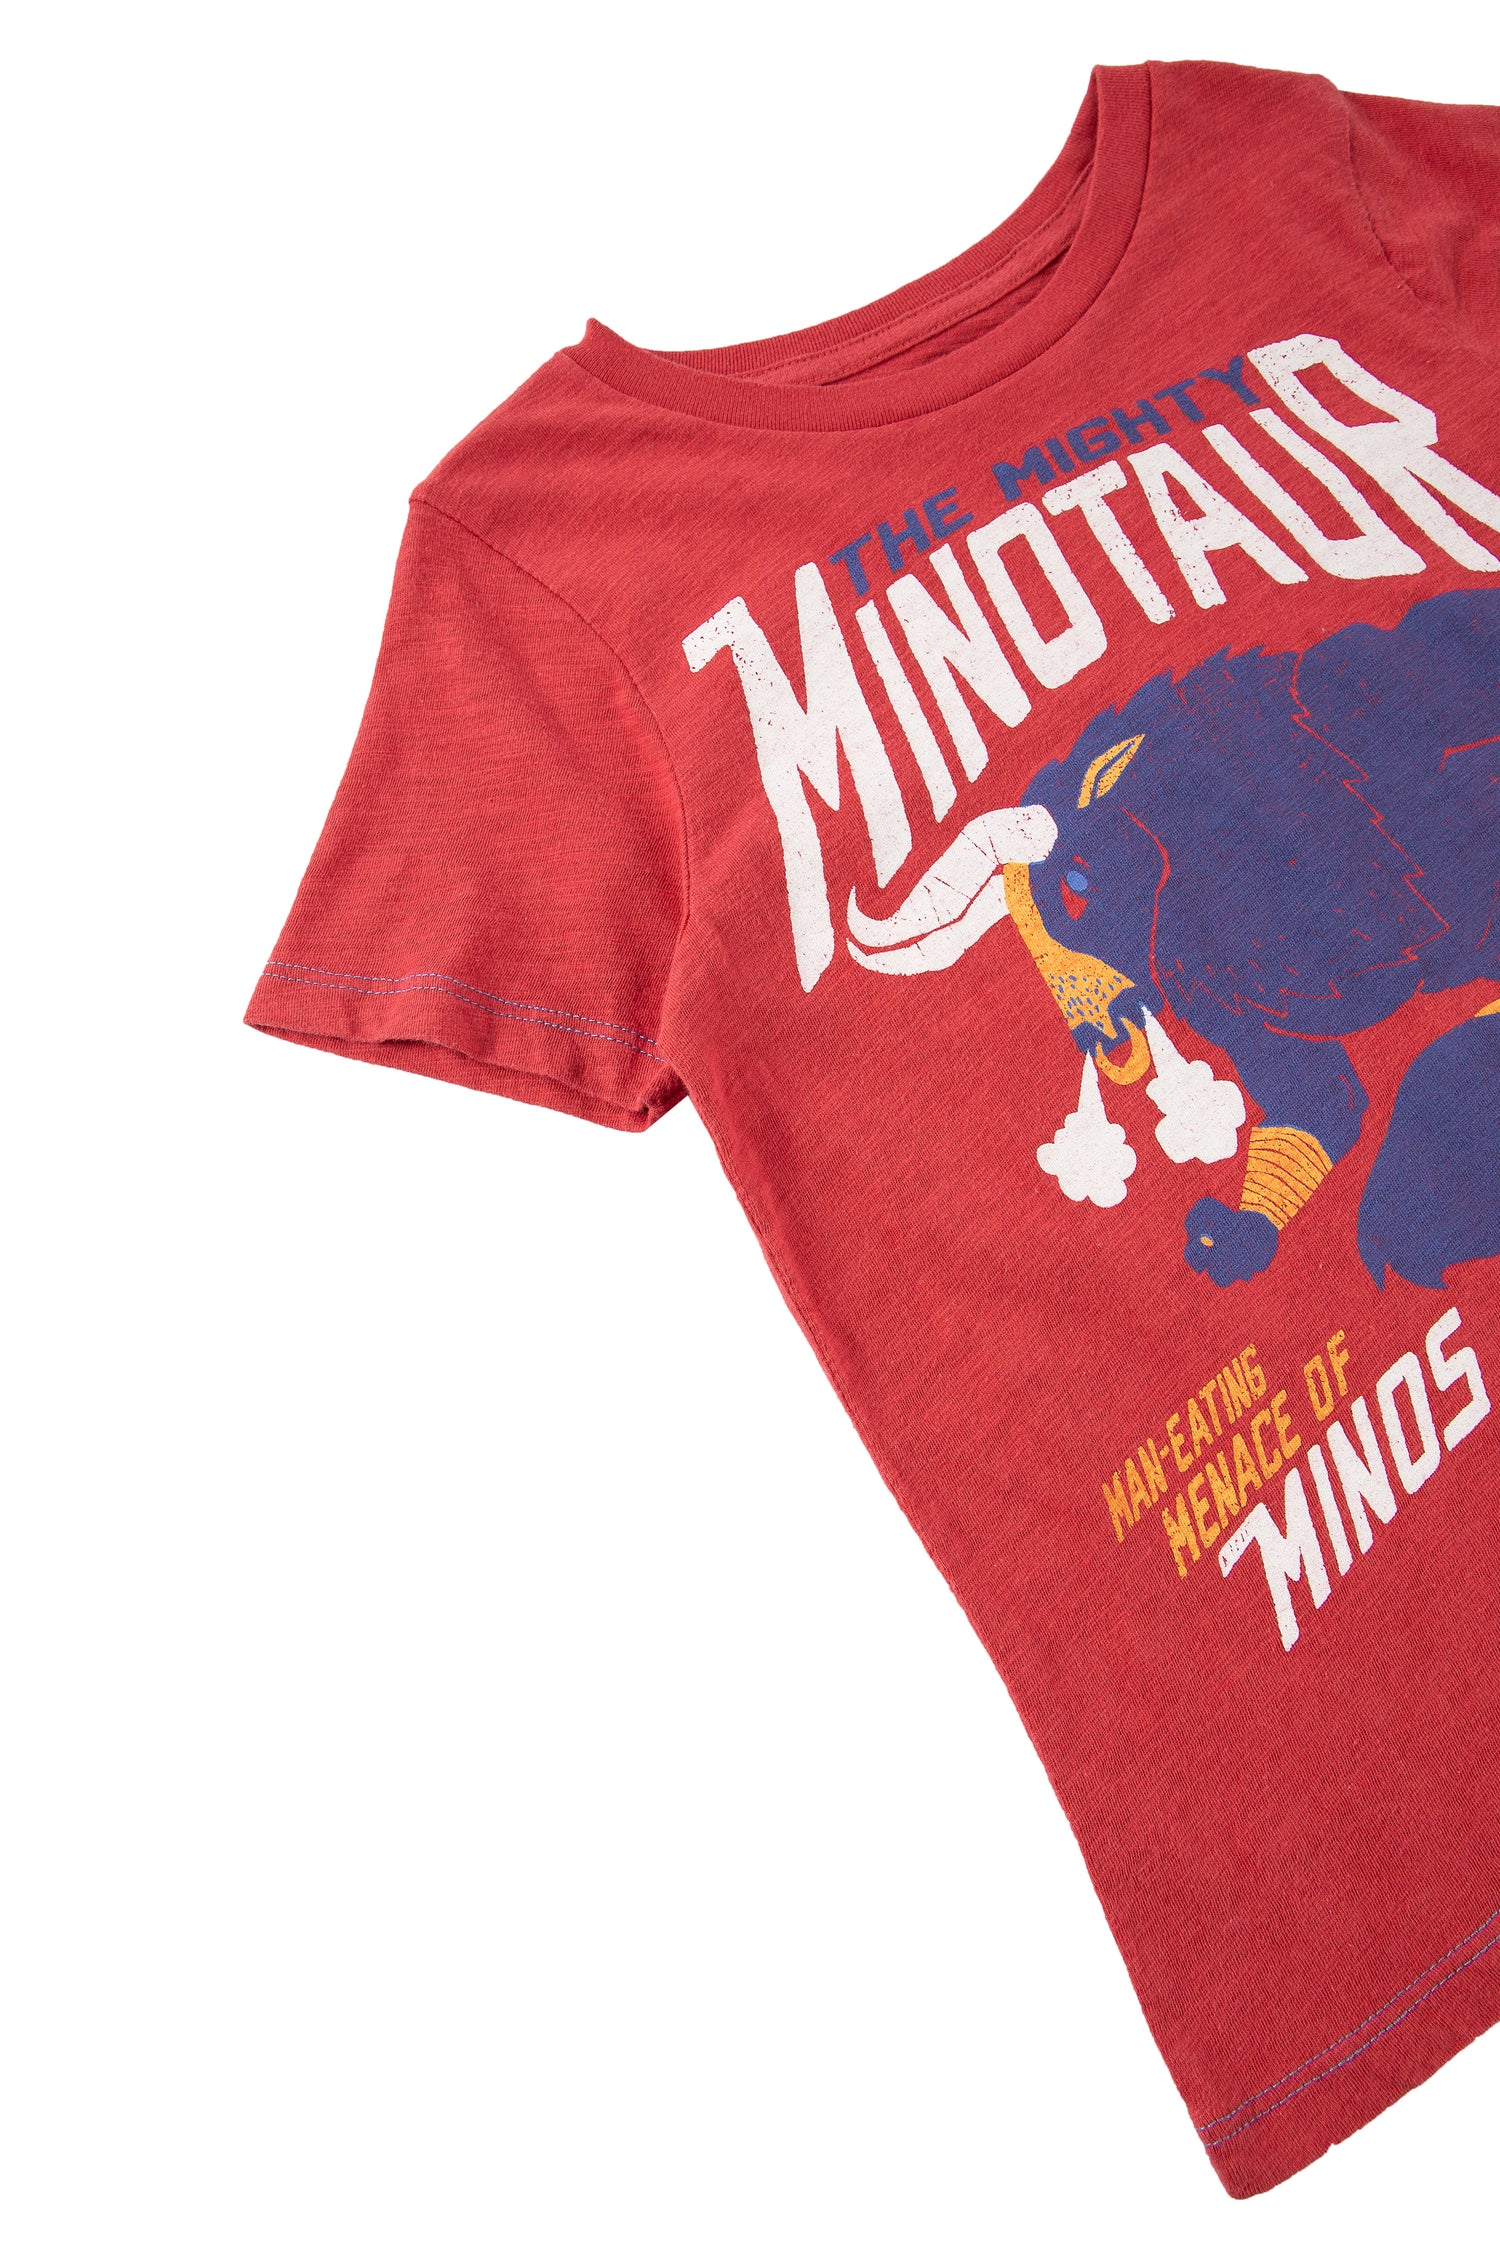 Close up of red t-shirt with minotaur illustration and text 'the mighty minotaur'